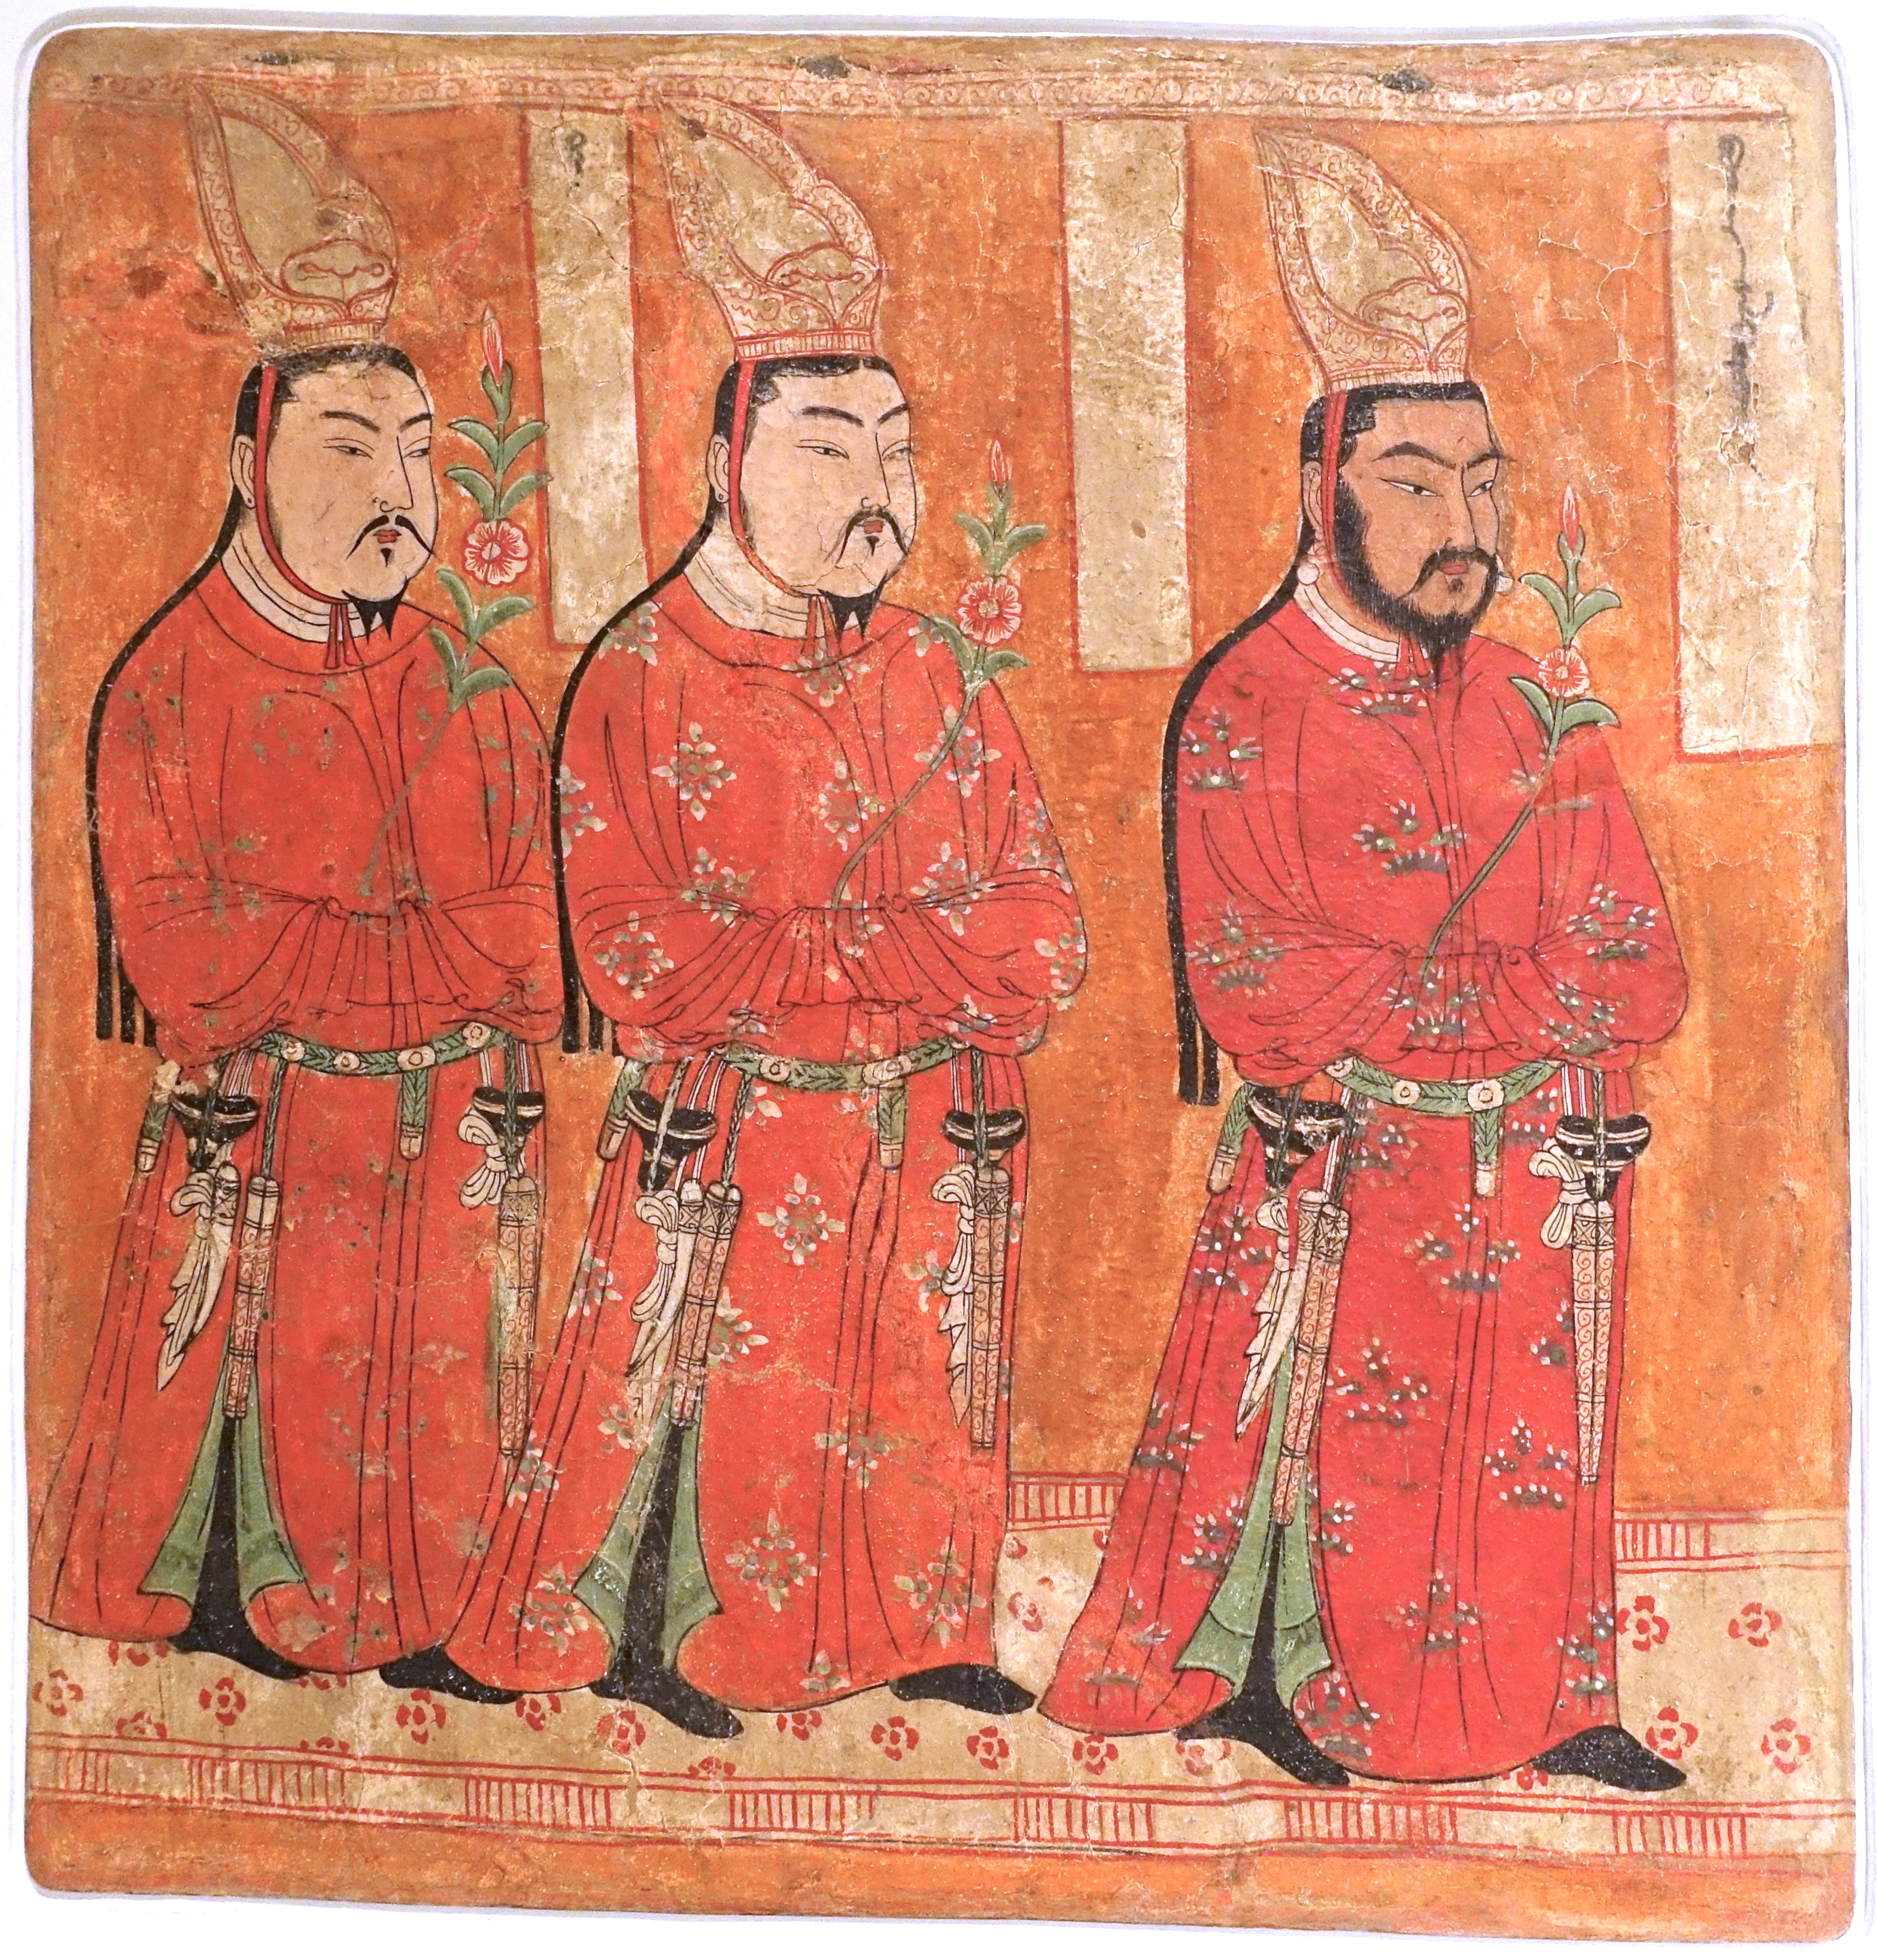 This wall painting in Xinjiang, China dating from the 8th–9th century depicts Uyghur princes. 